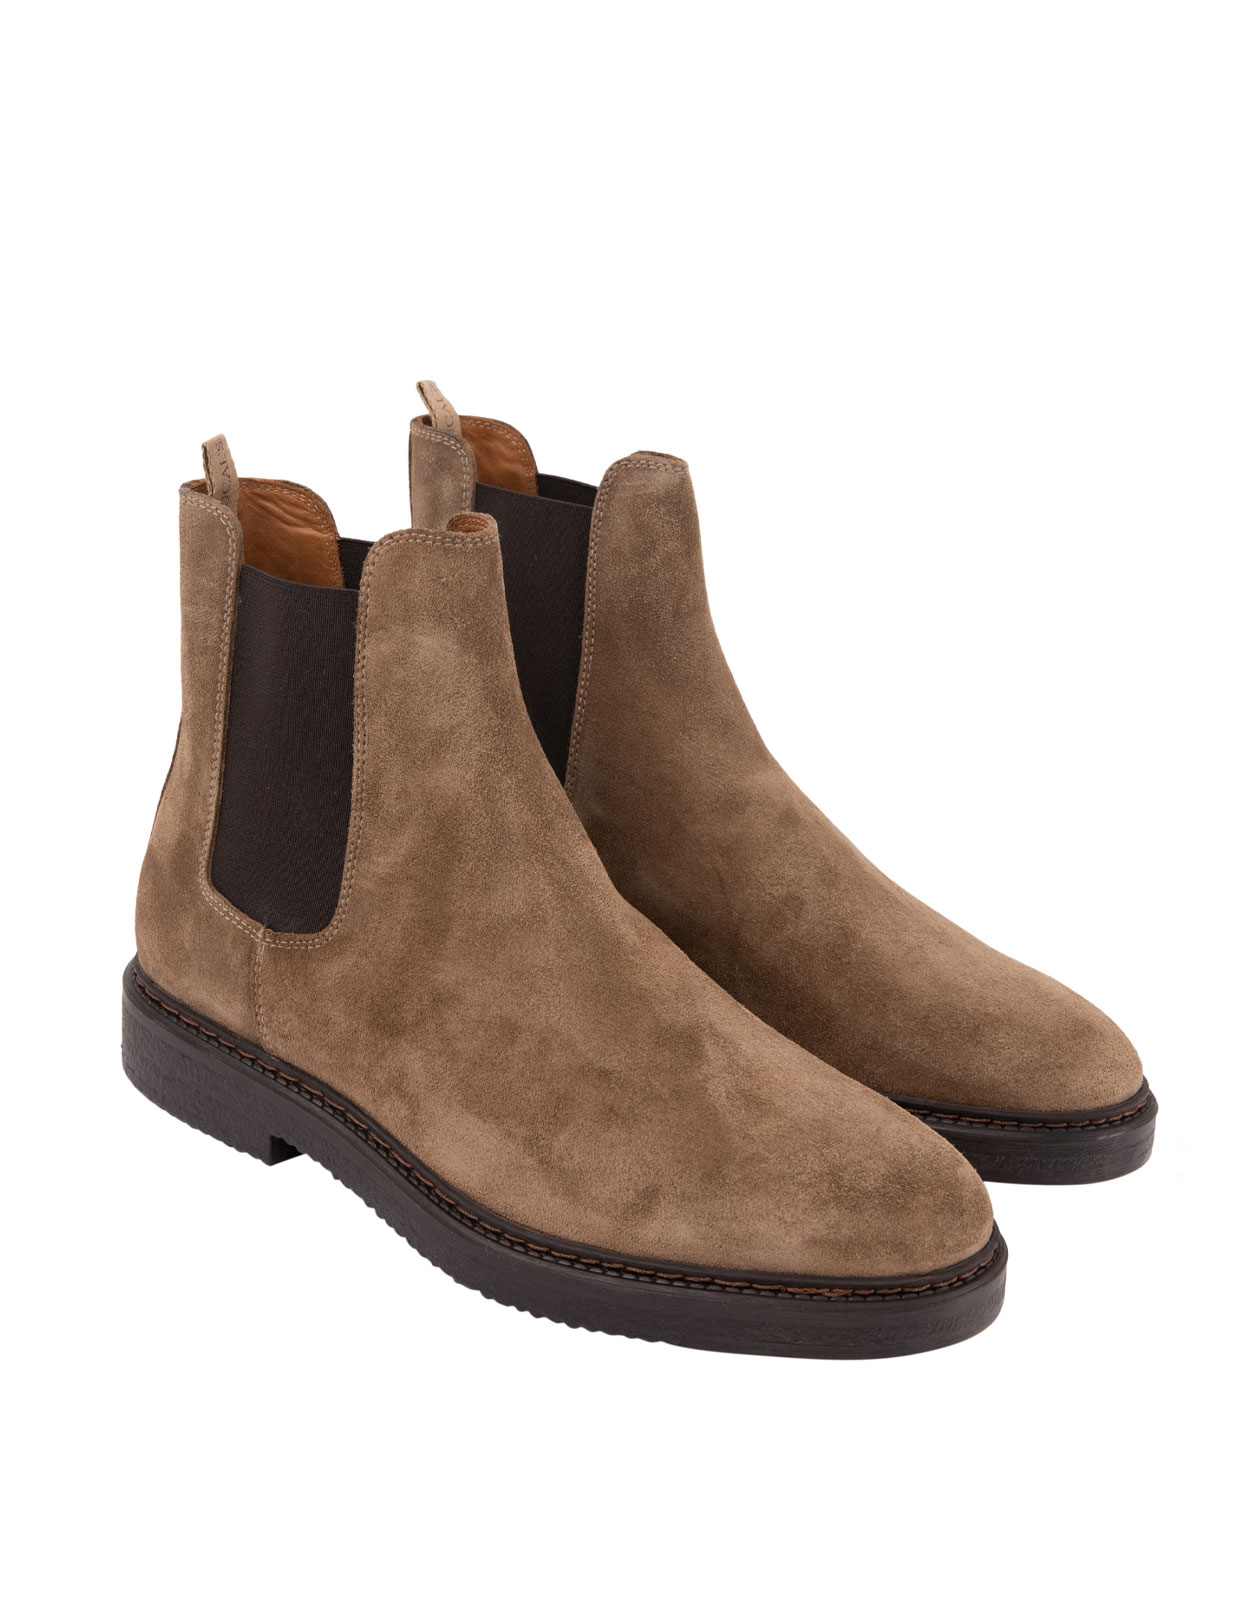 Chelsea Boots Tabacco Stl 44.5